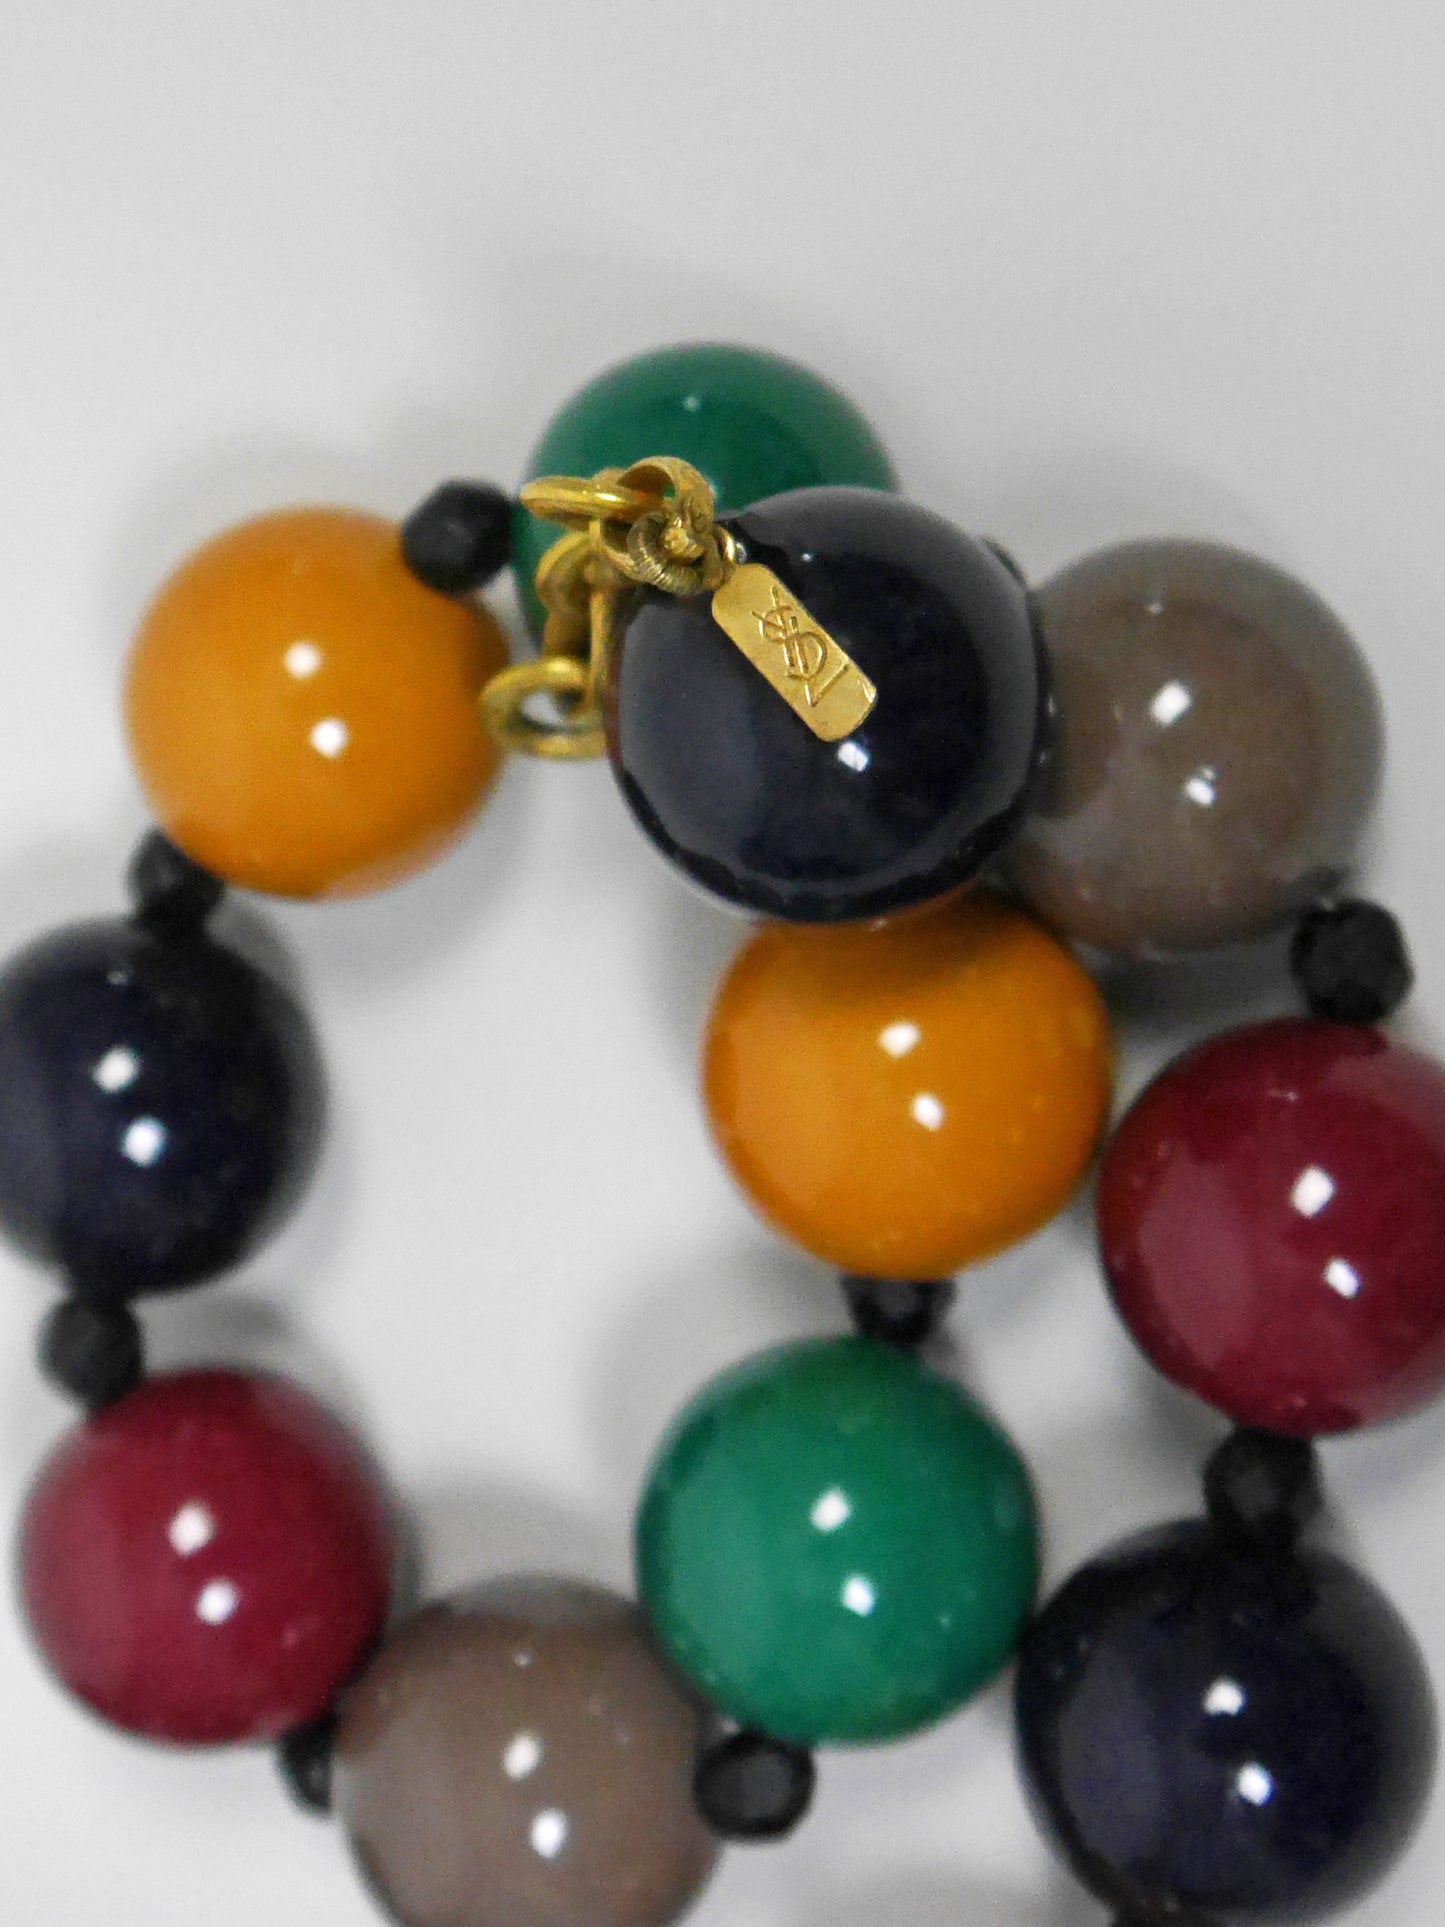 YVES SAINT LAURENT by Roger Scemama 1970s Vintage Chunky Beads Necklace